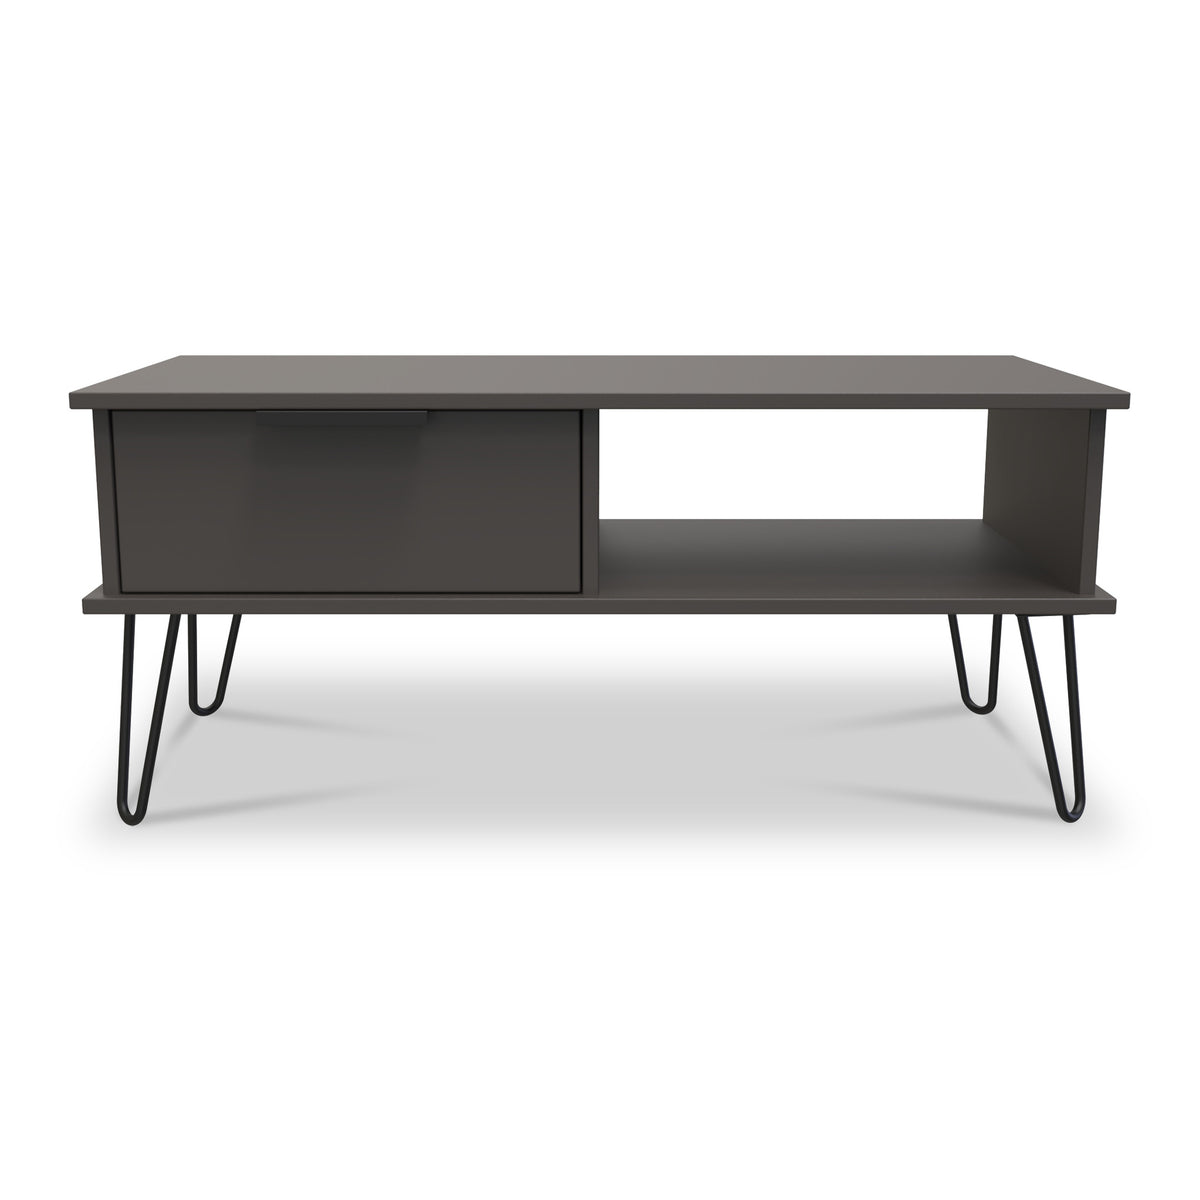 Moreno Graphite Grey 1 Drawer Coffee Table with hairpin legs from Roseland Furniture